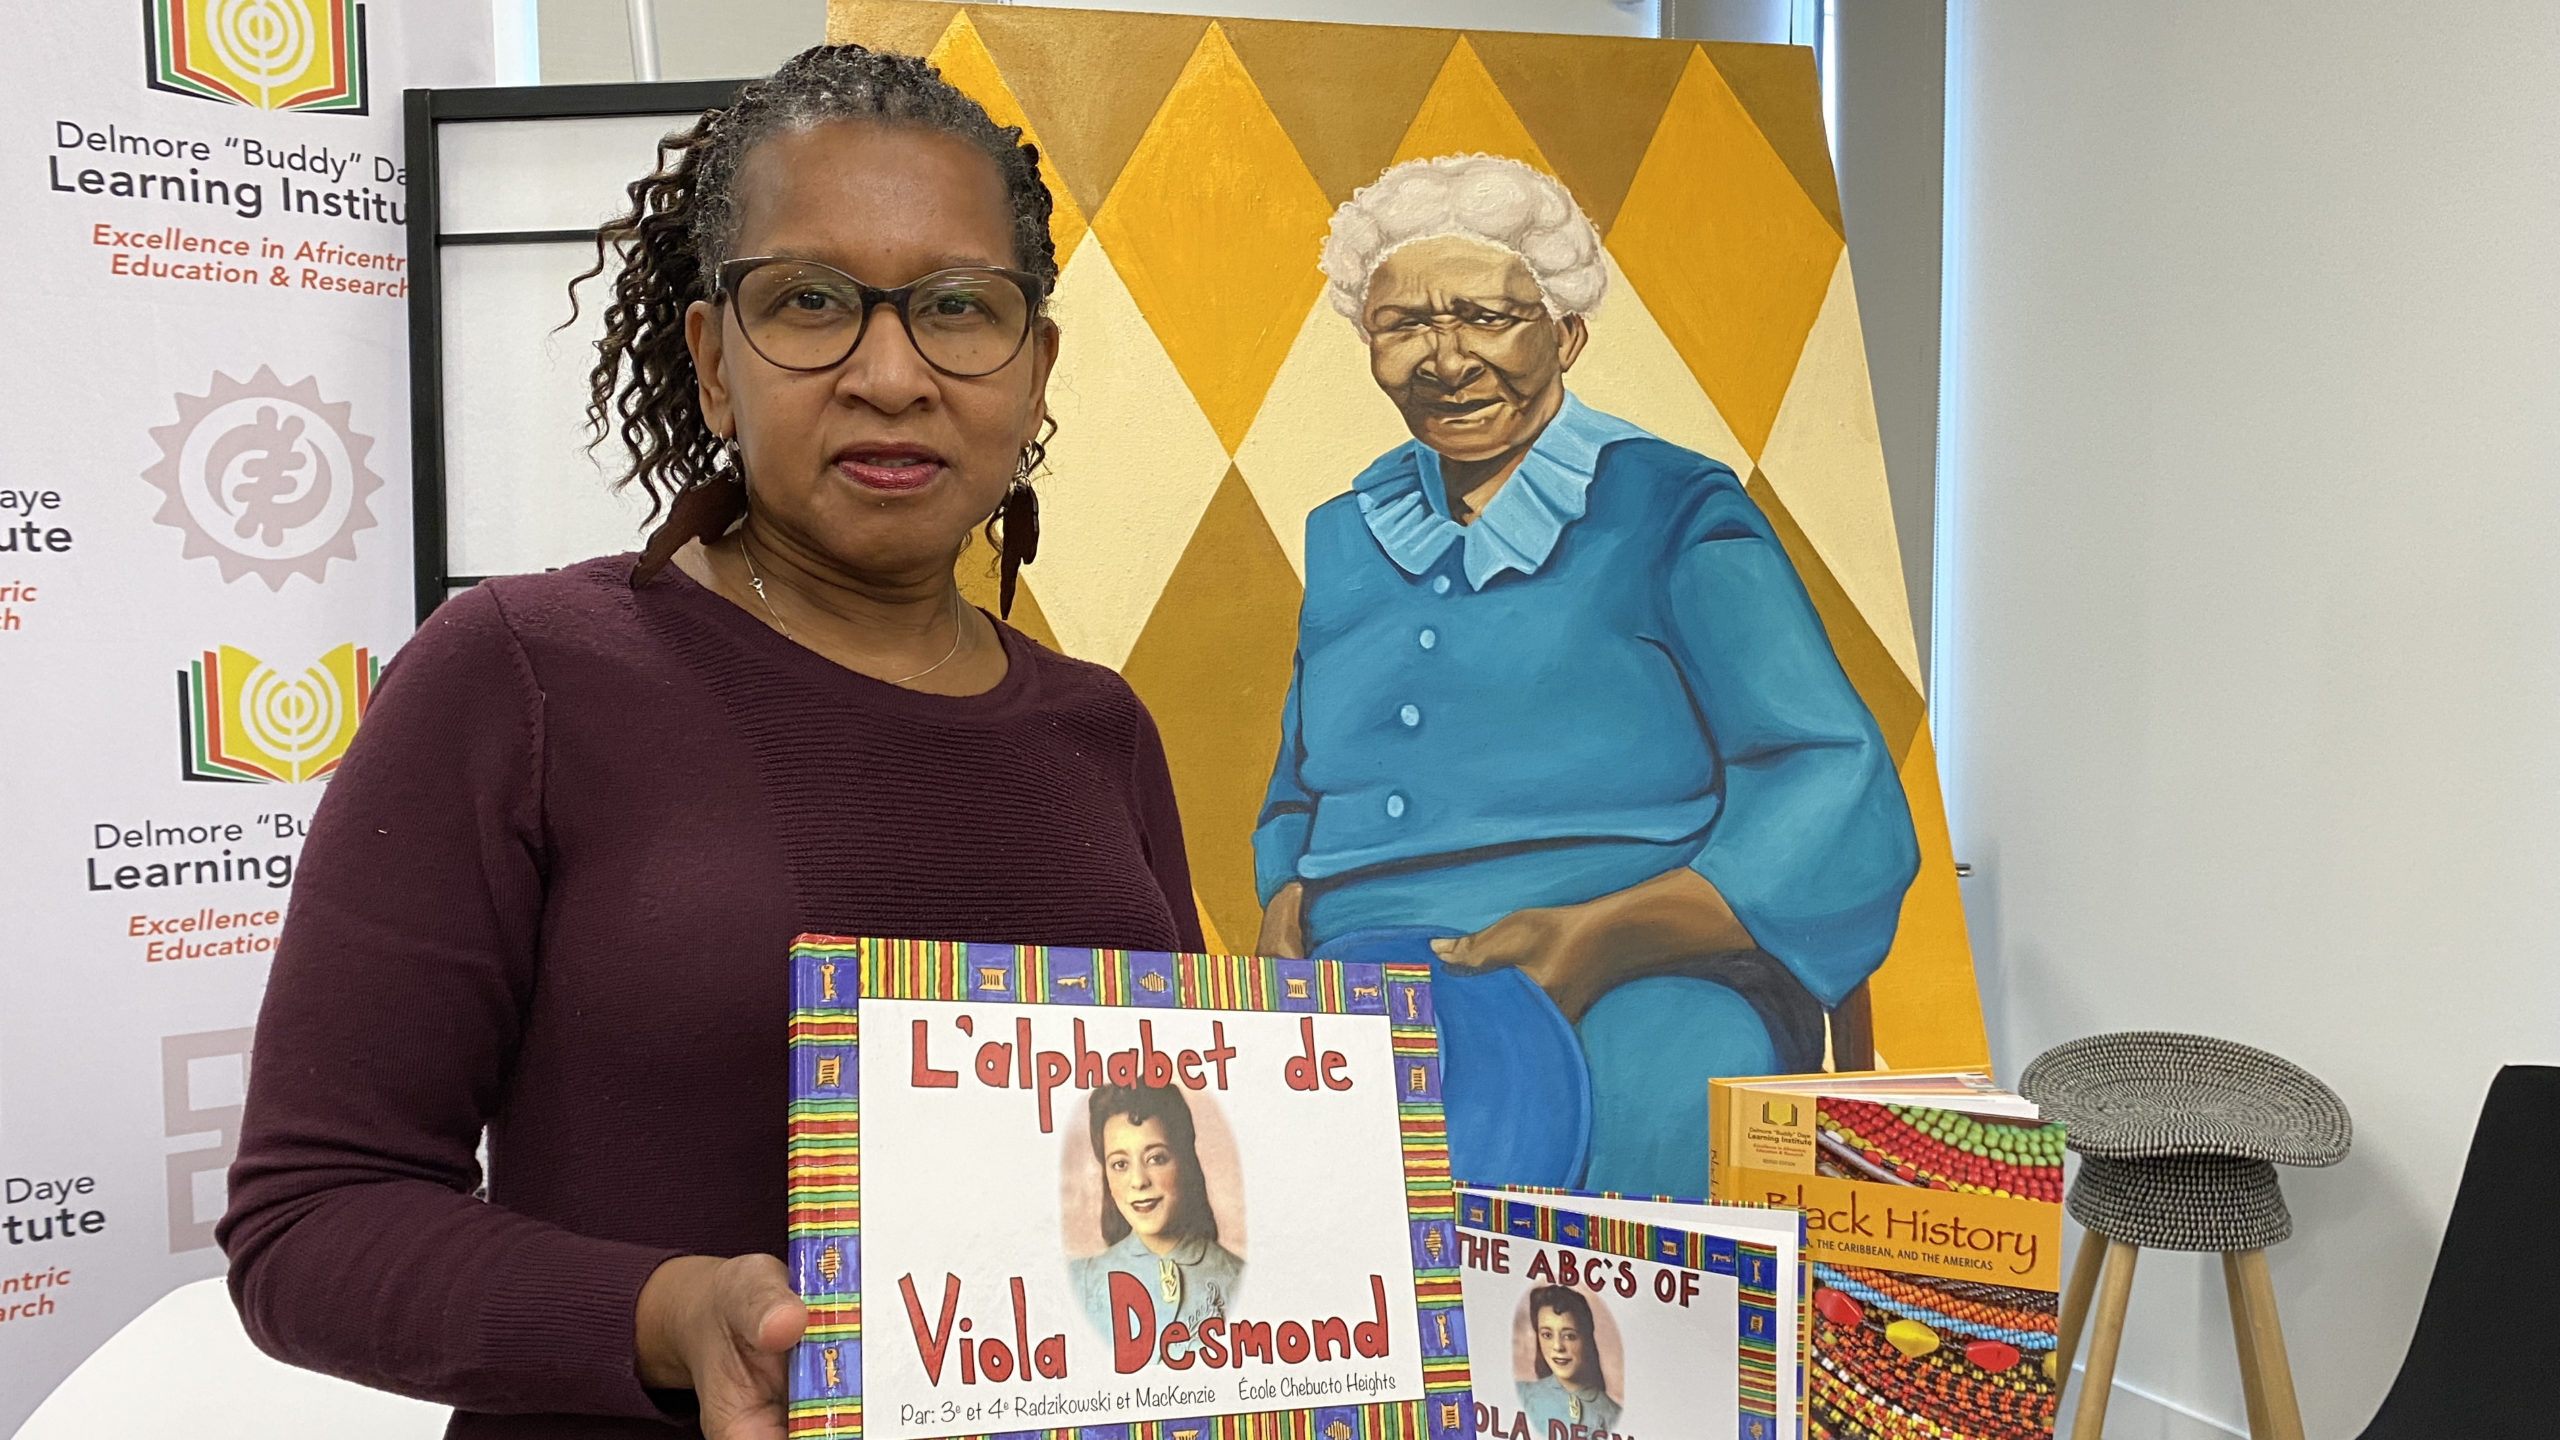 Sylvia Parris-Drummond poses with a selection of the Delmore "Buddy" Daye Learning Institute's educational materials and a painting by local artist Letitia Fraser that will be featured on the cover of a forthcoming textbook.